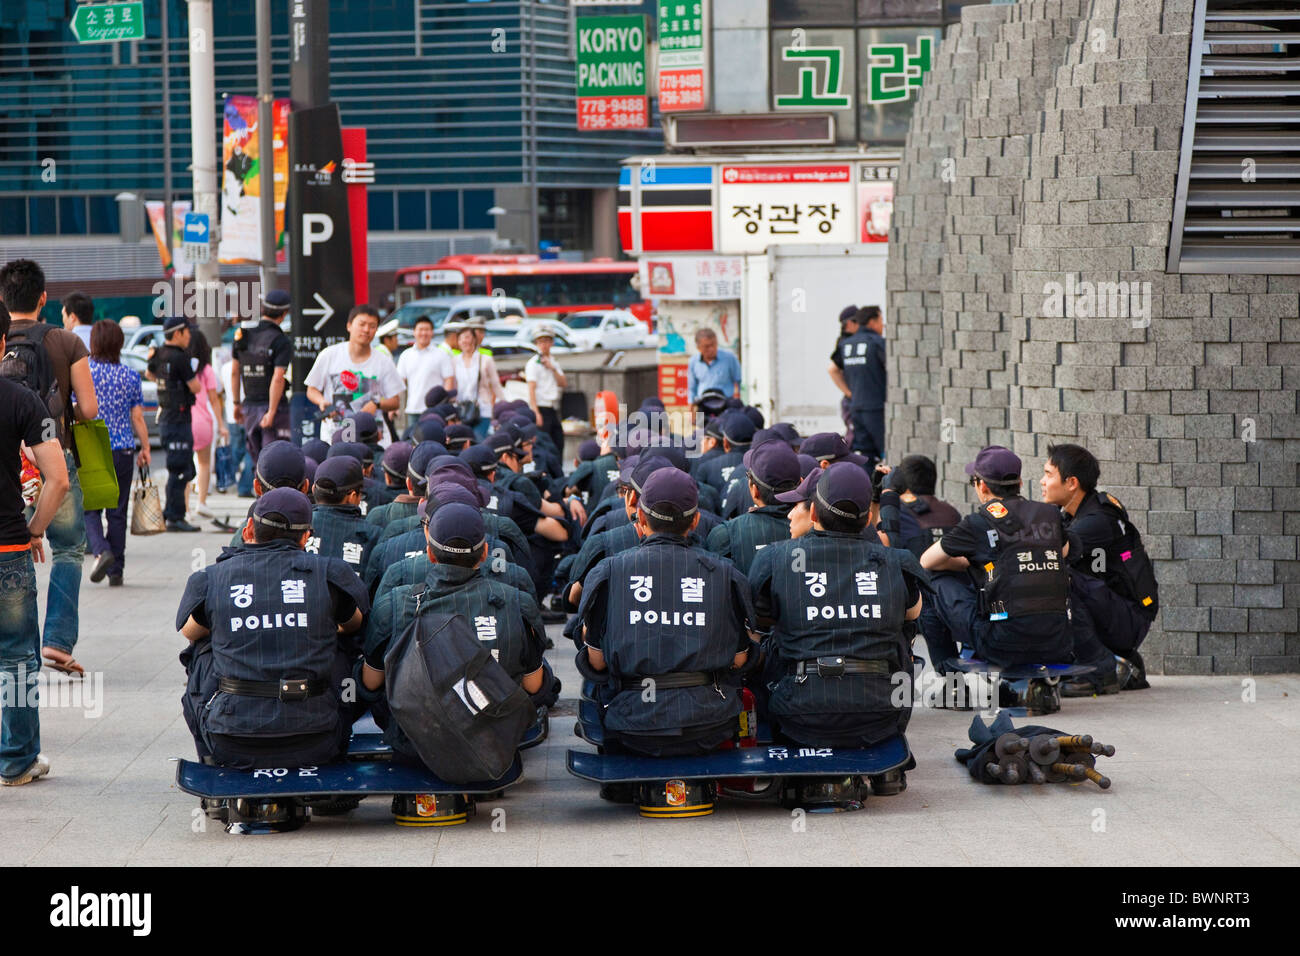 Riot police waiting at the ready in Myeong-dong, Seoul, South Korea. JMH3848 Stock Photo